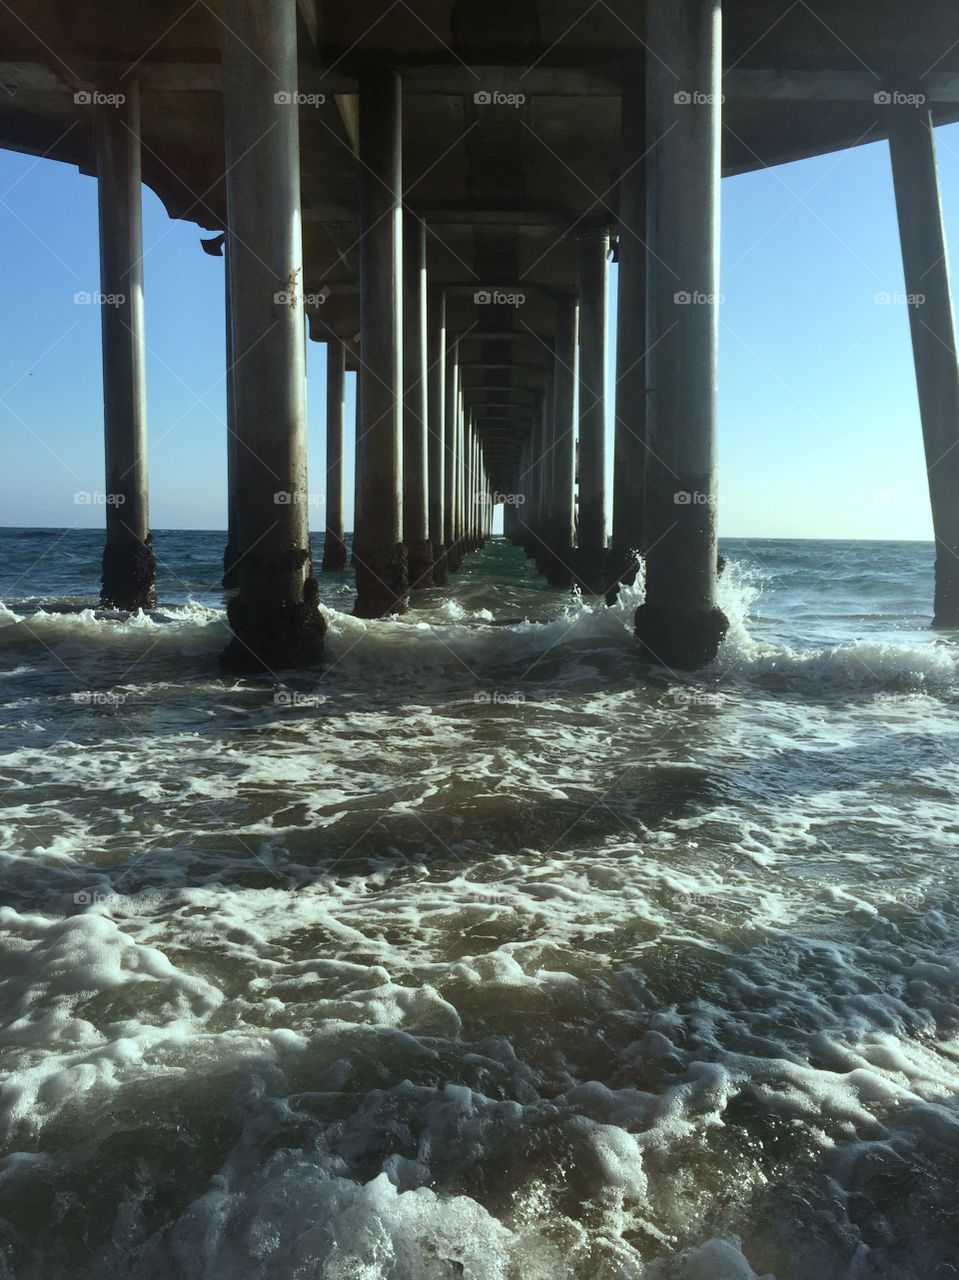 The waves collide with the posts beneath Huntington pier in California, causing the white wash to disperse at the foot of each column. 